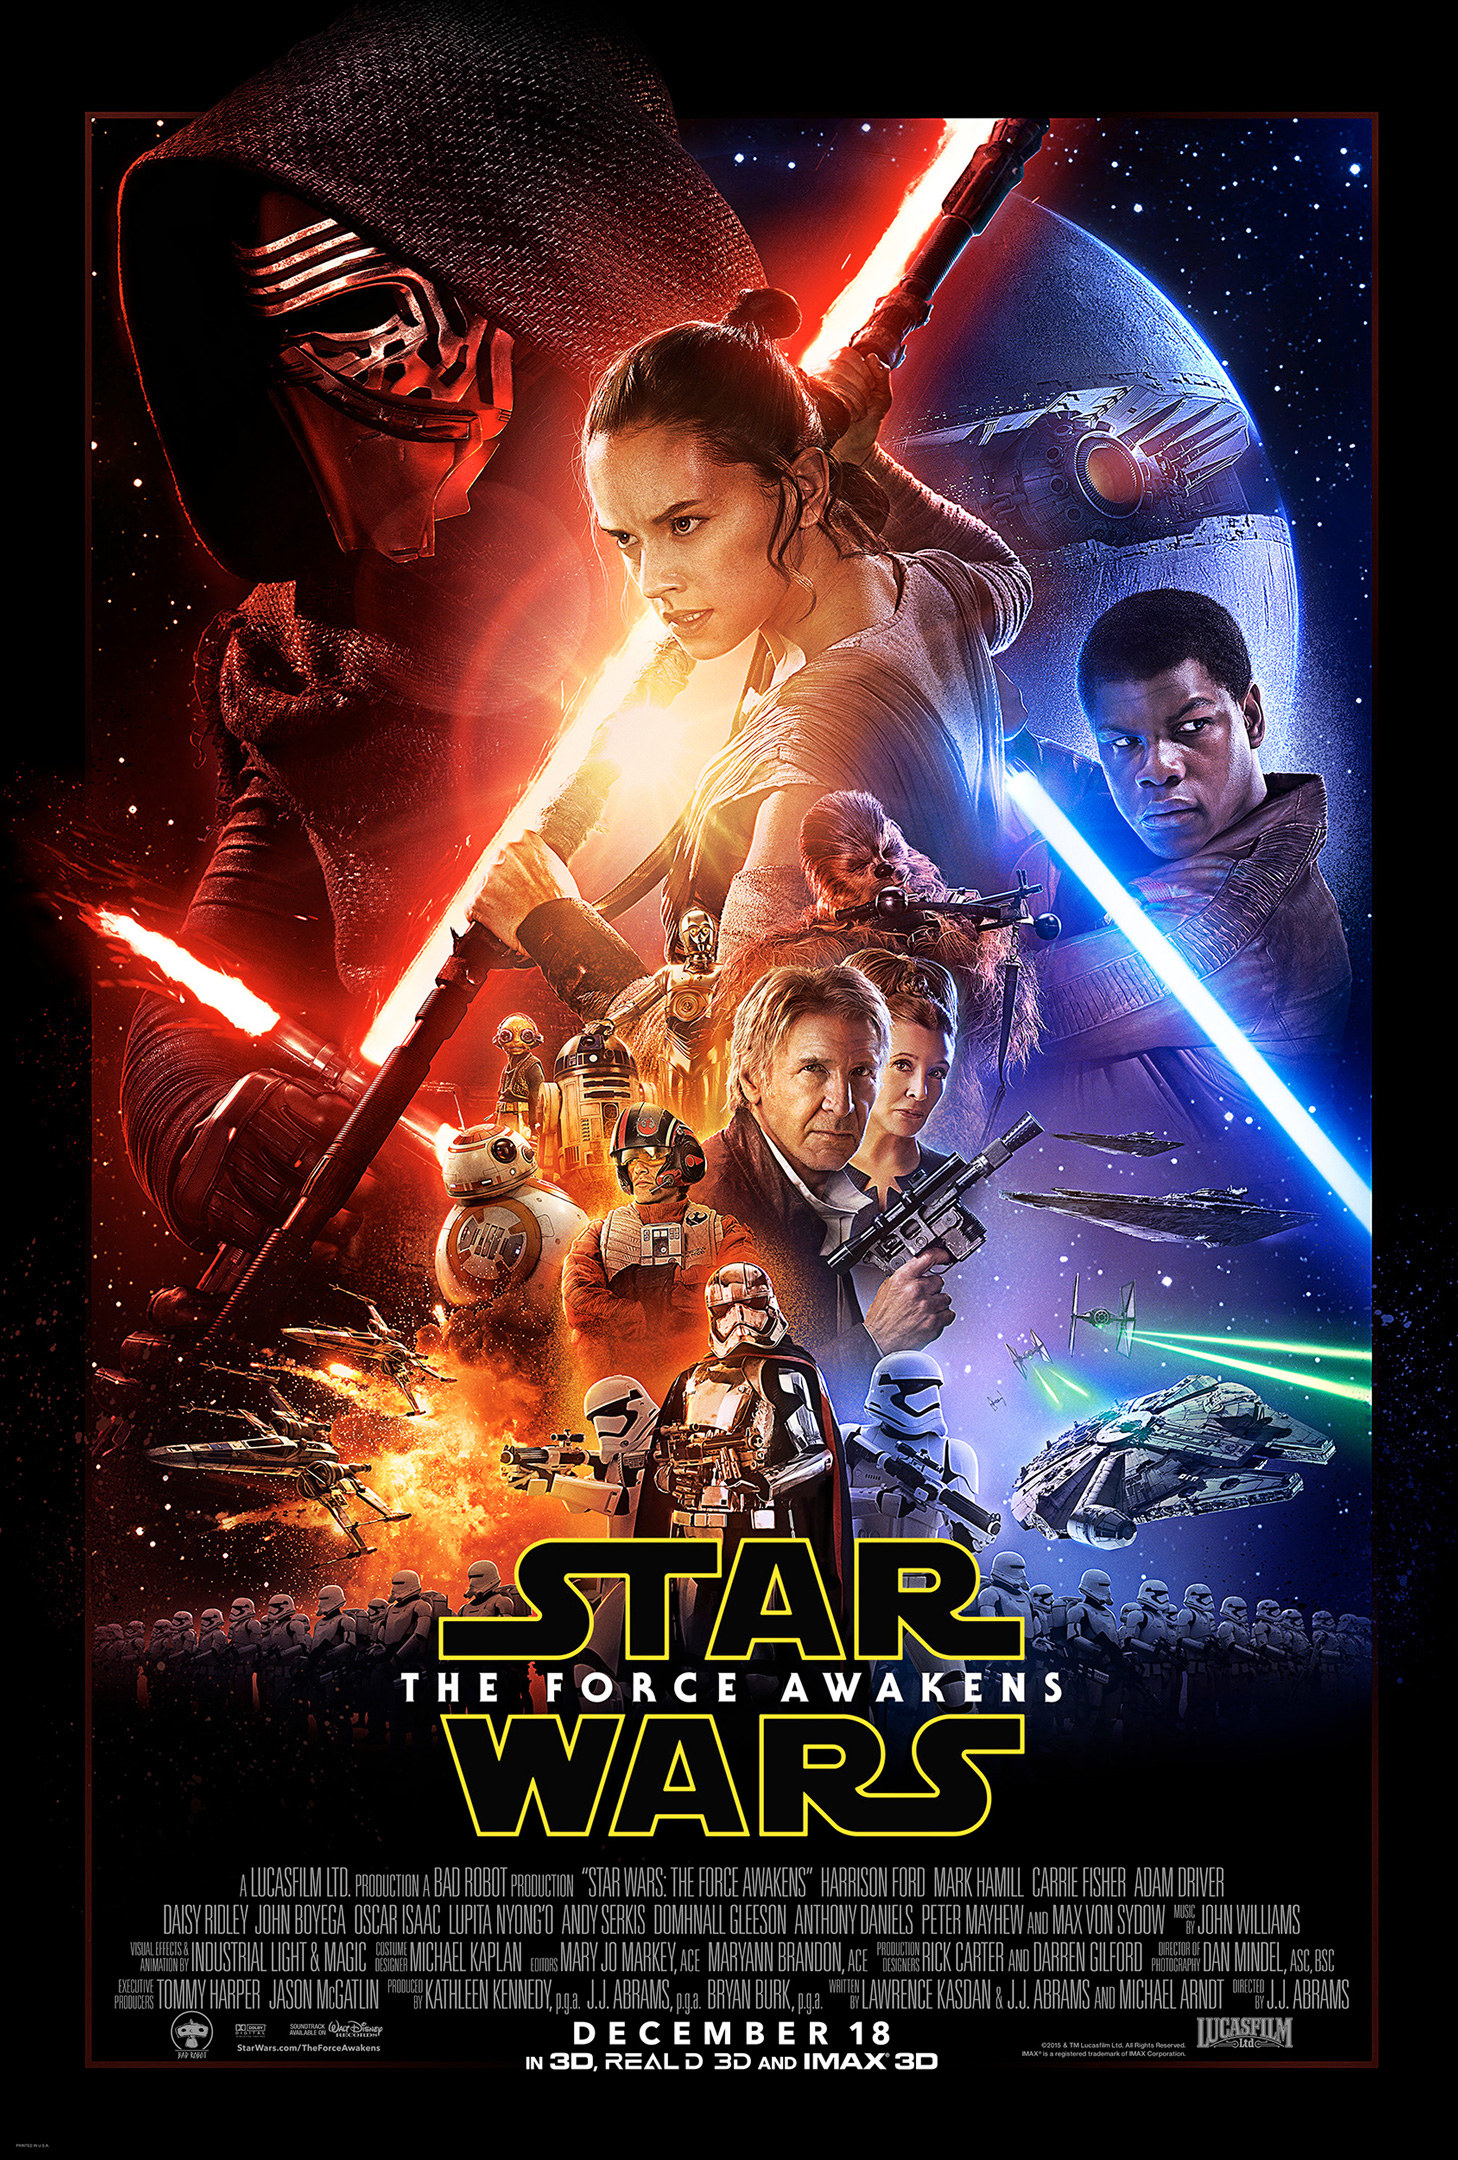 Review – Star Wars: The Force Awakens (Non-Spoiler)